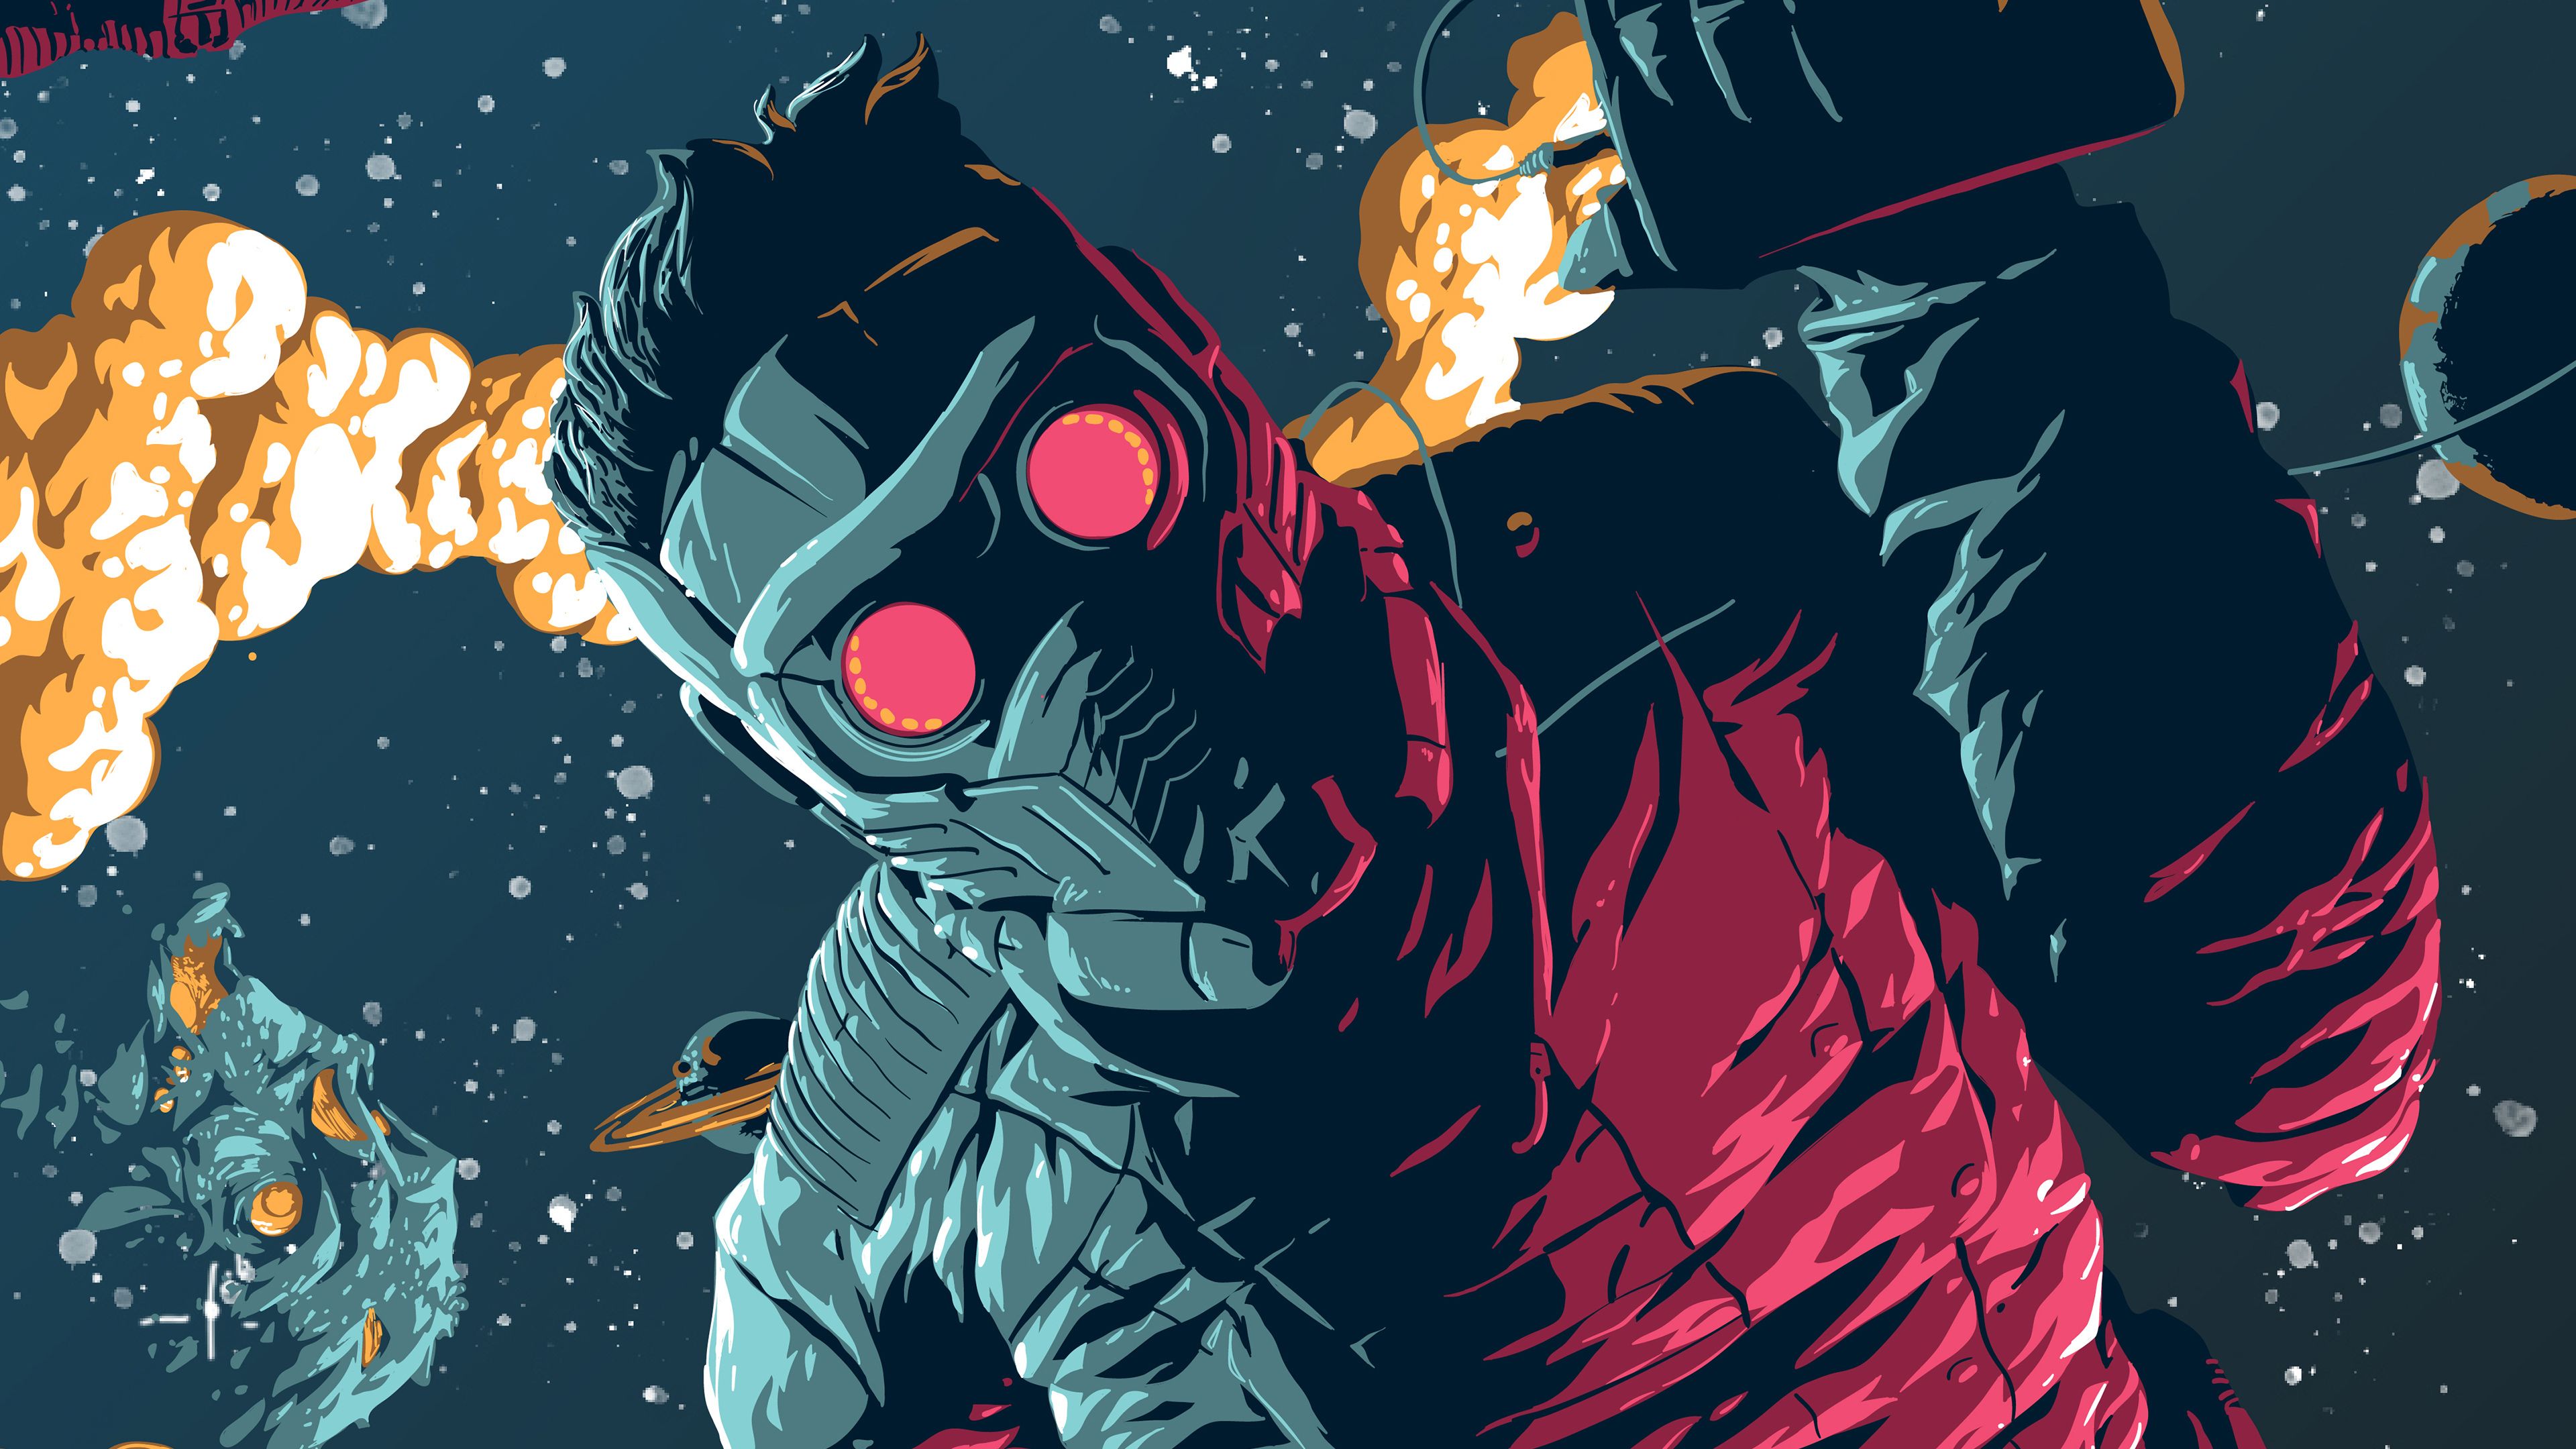 Wallpaper, Starlord, Star Lord, Guardians of the Galaxy, Guardians of the Galaxy Vol movies, Marvel Comics 3840x2160